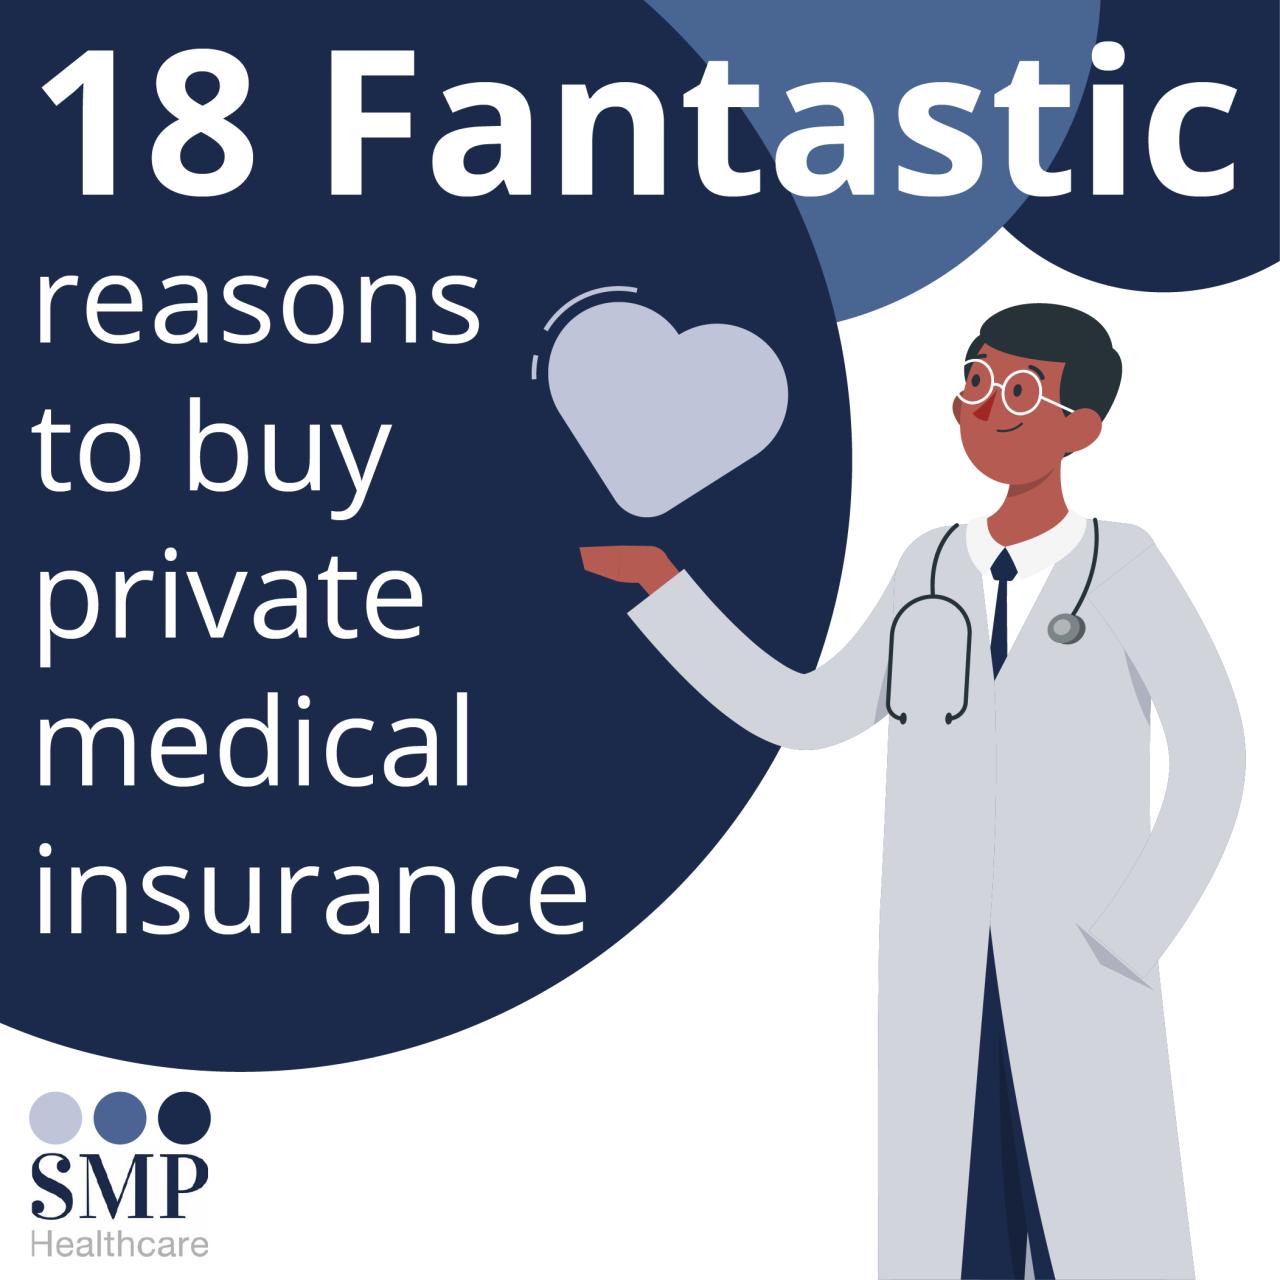 Insurance private medical